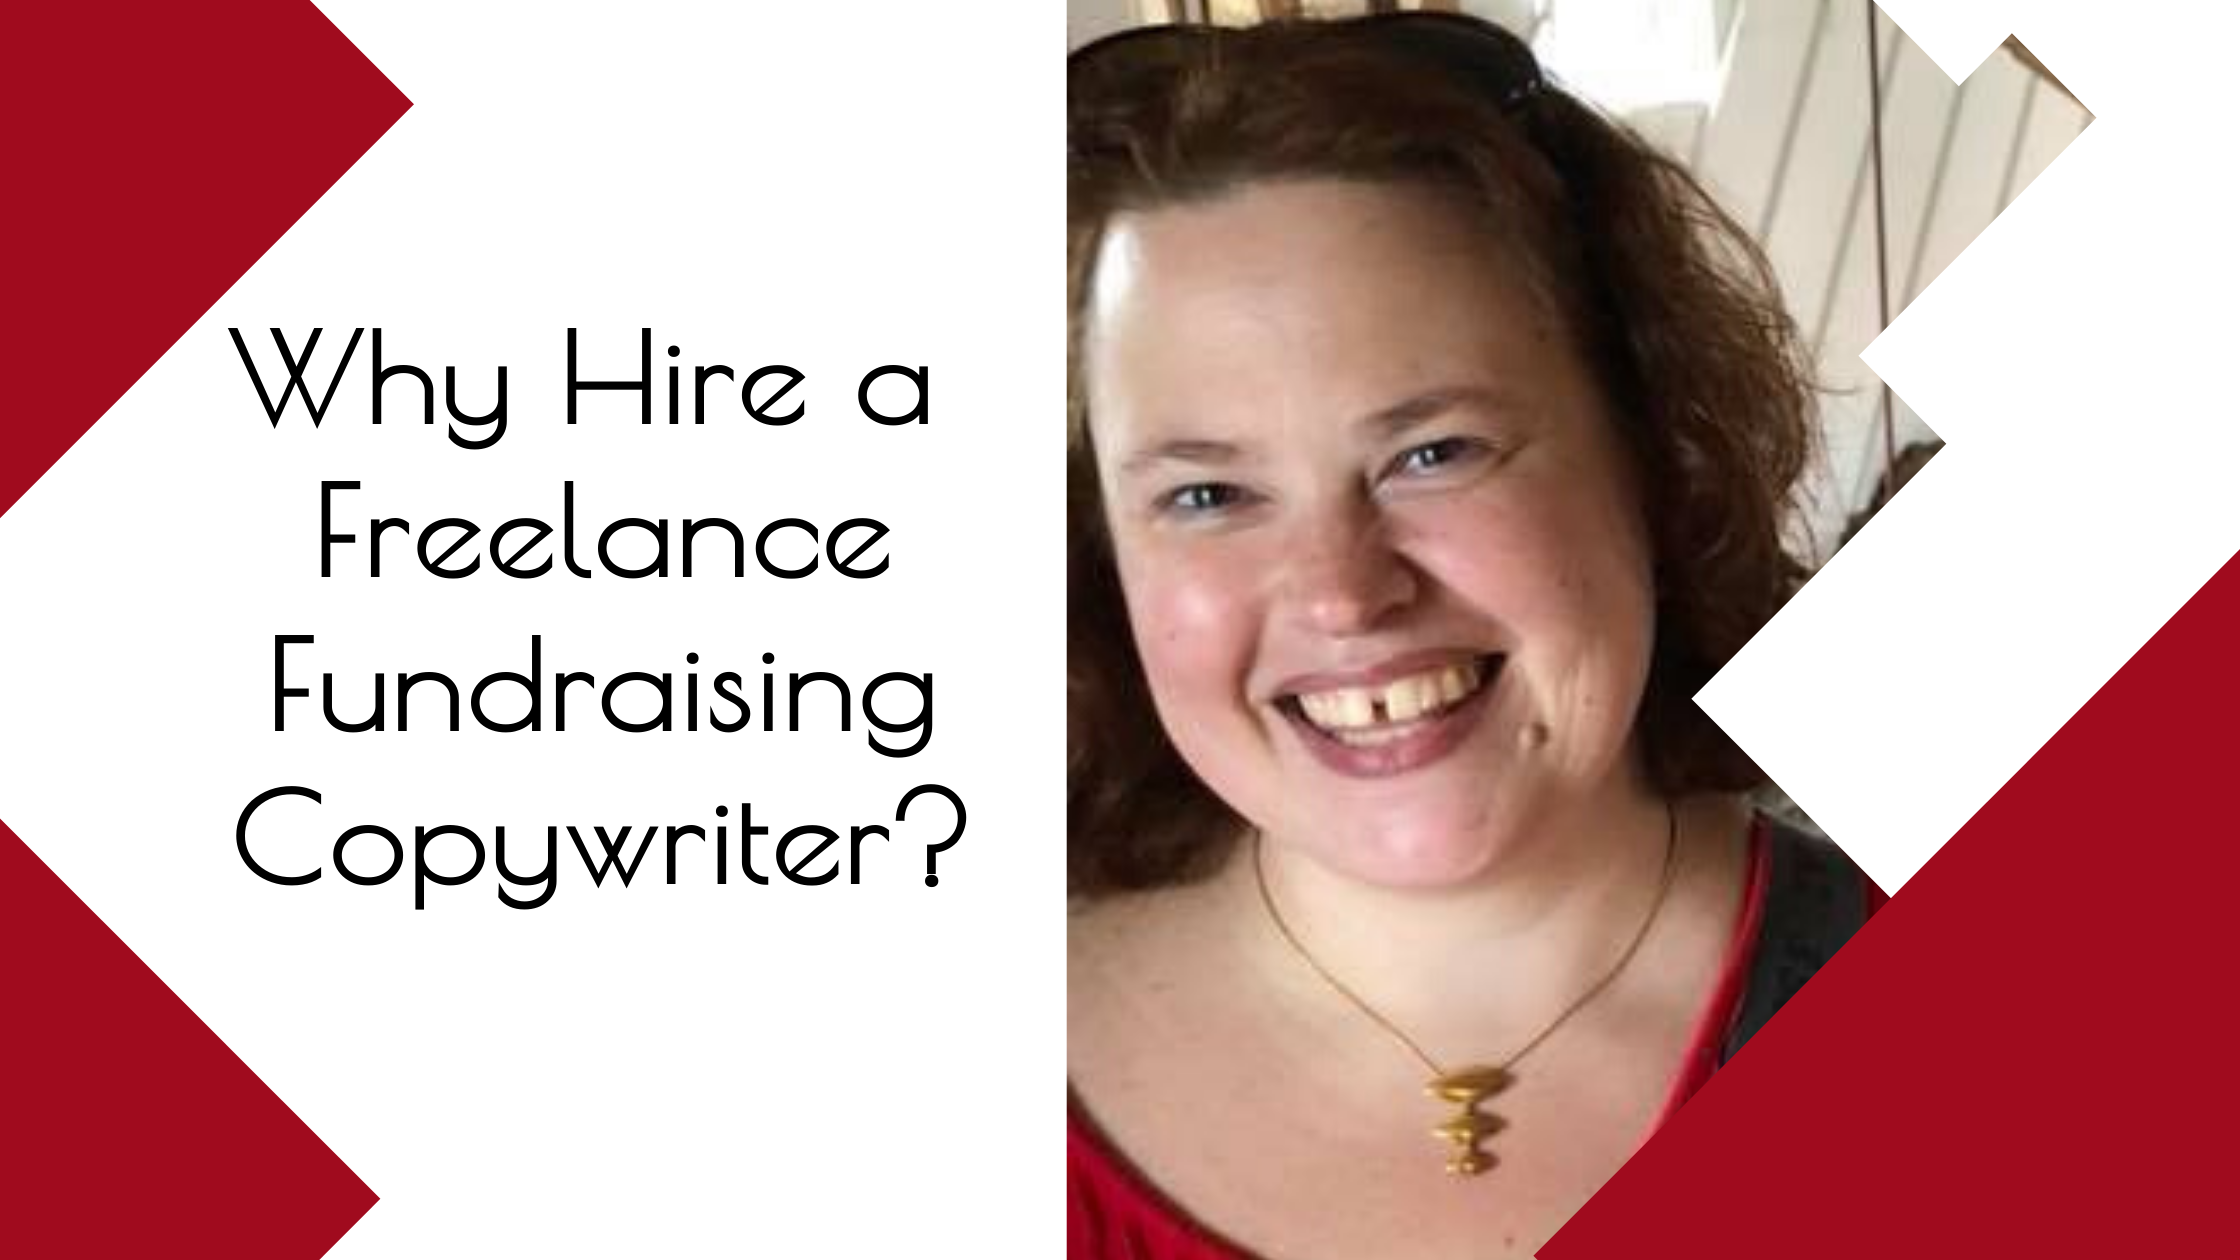 why hire a freelance fundraising copywriter?